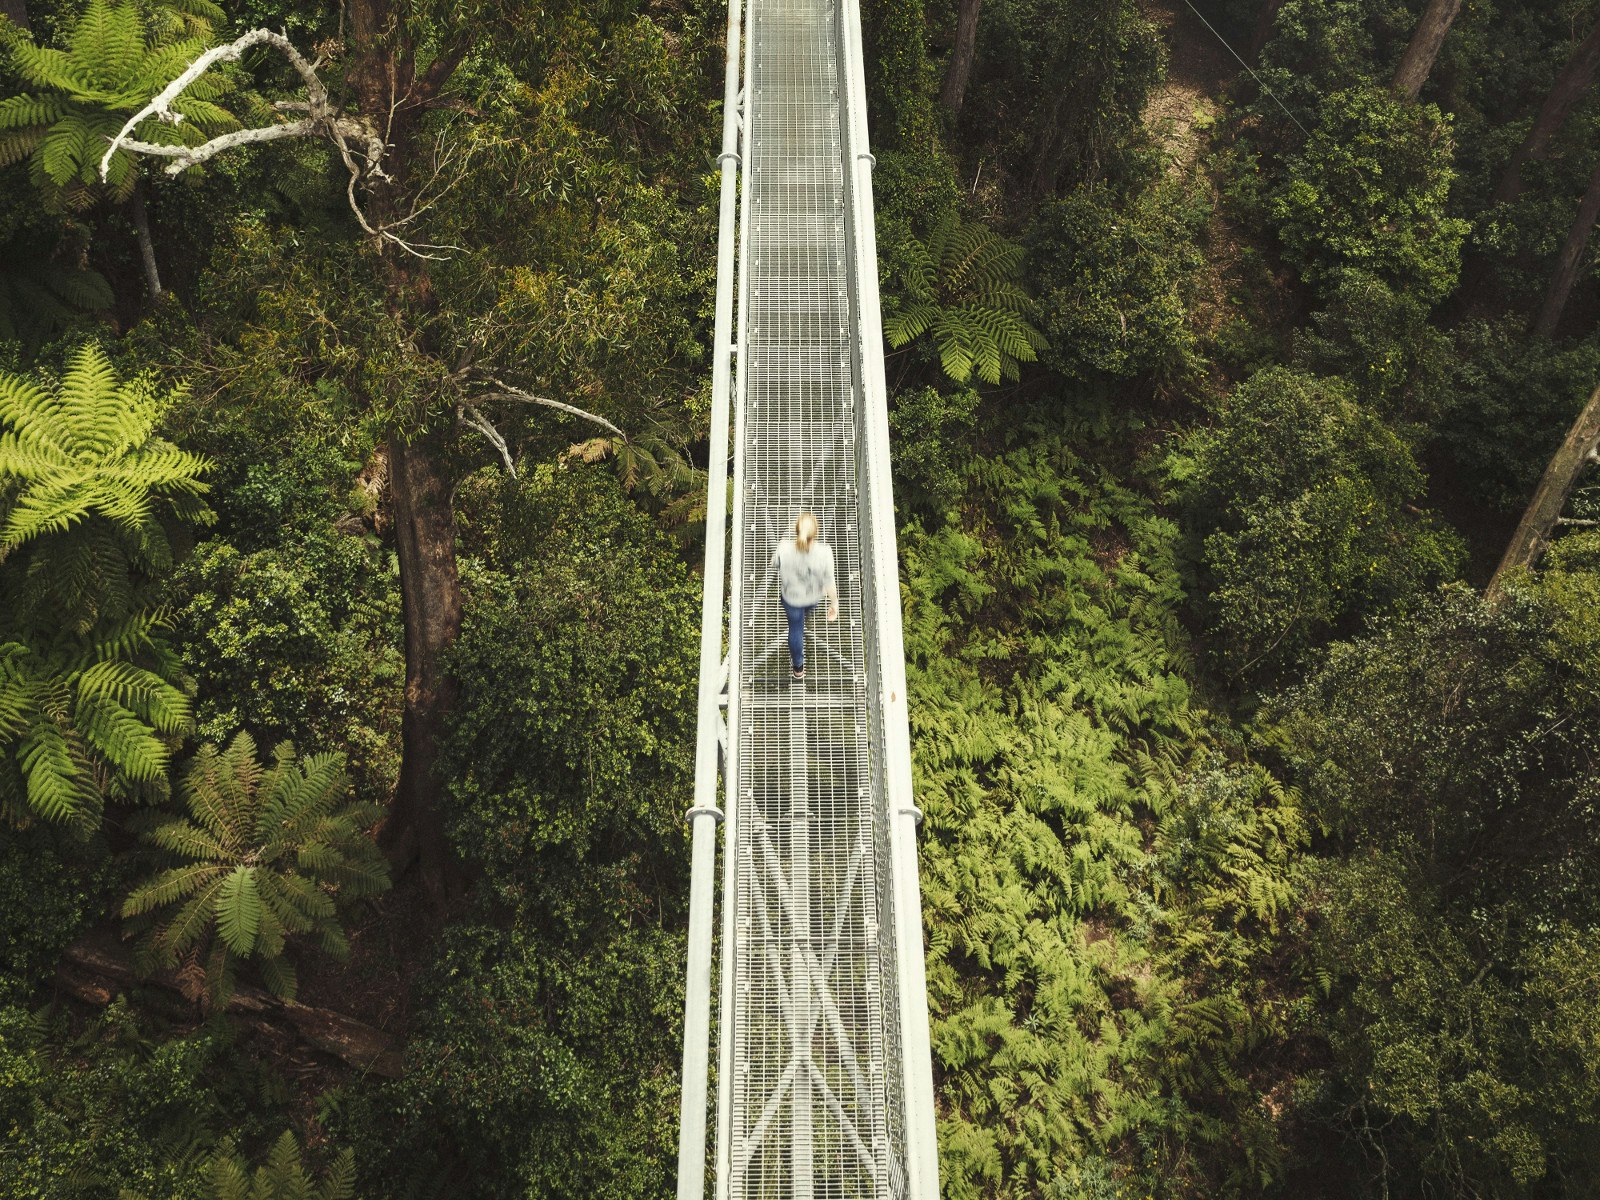 Jessica Cole walking along the Illawarra treetop walkway, suspended 30 metres above the ground